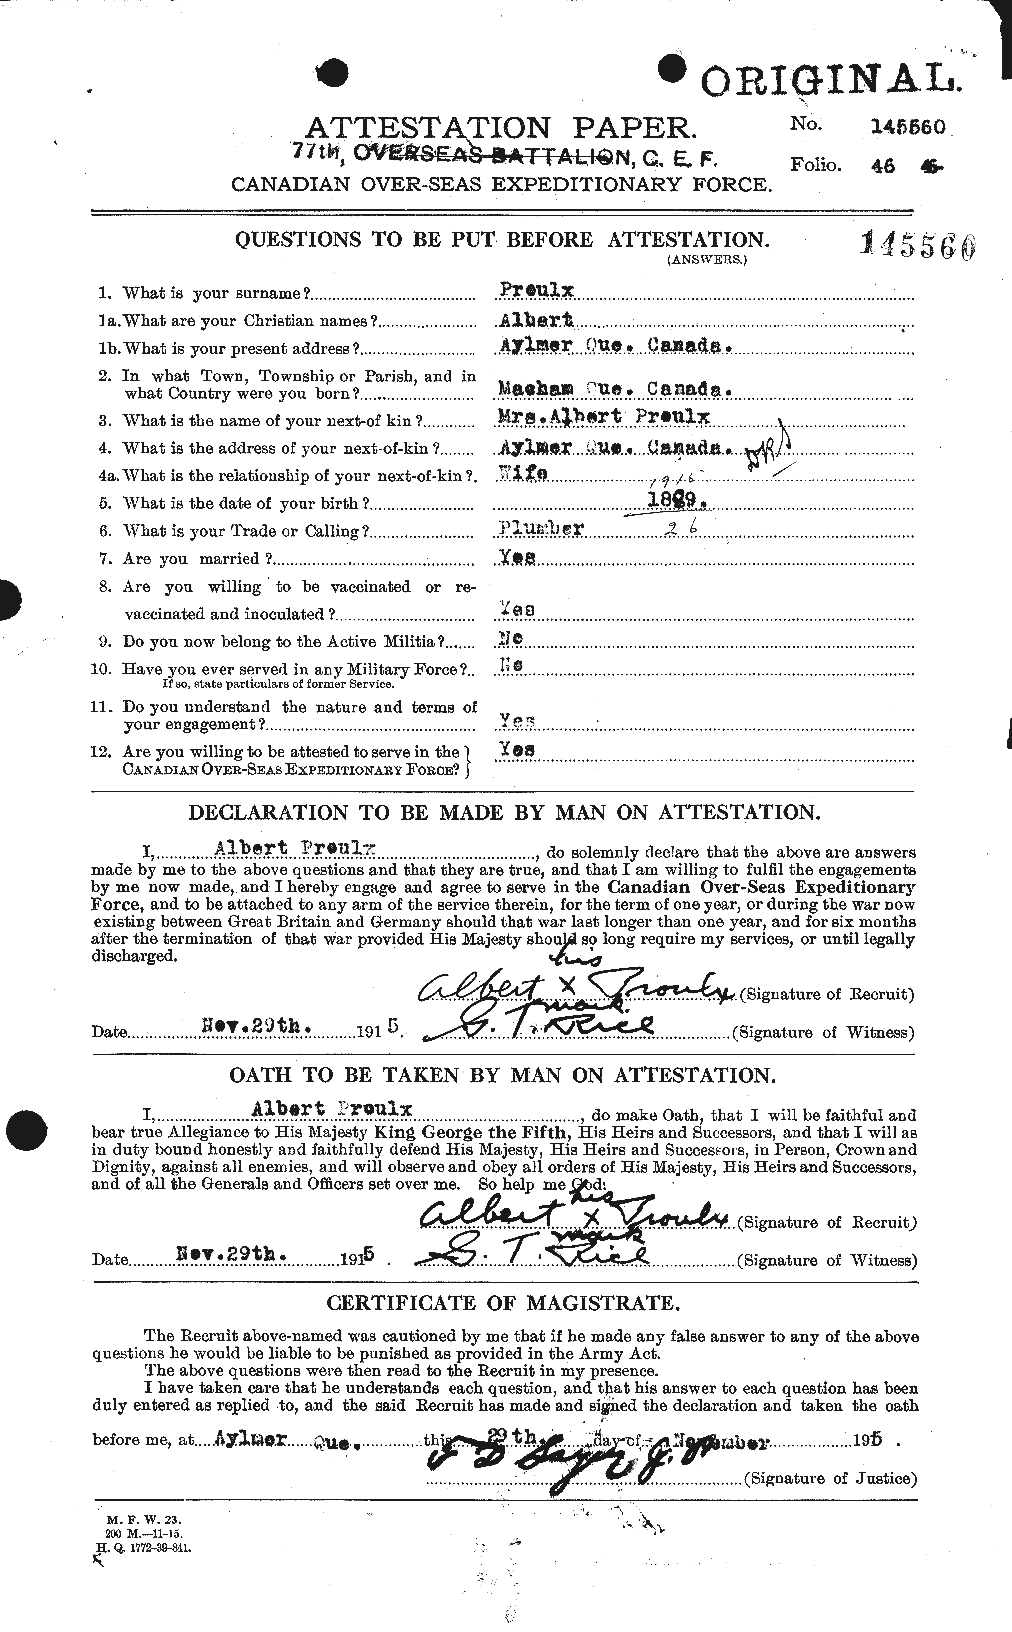 Personnel Records of the First World War - CEF 591499a